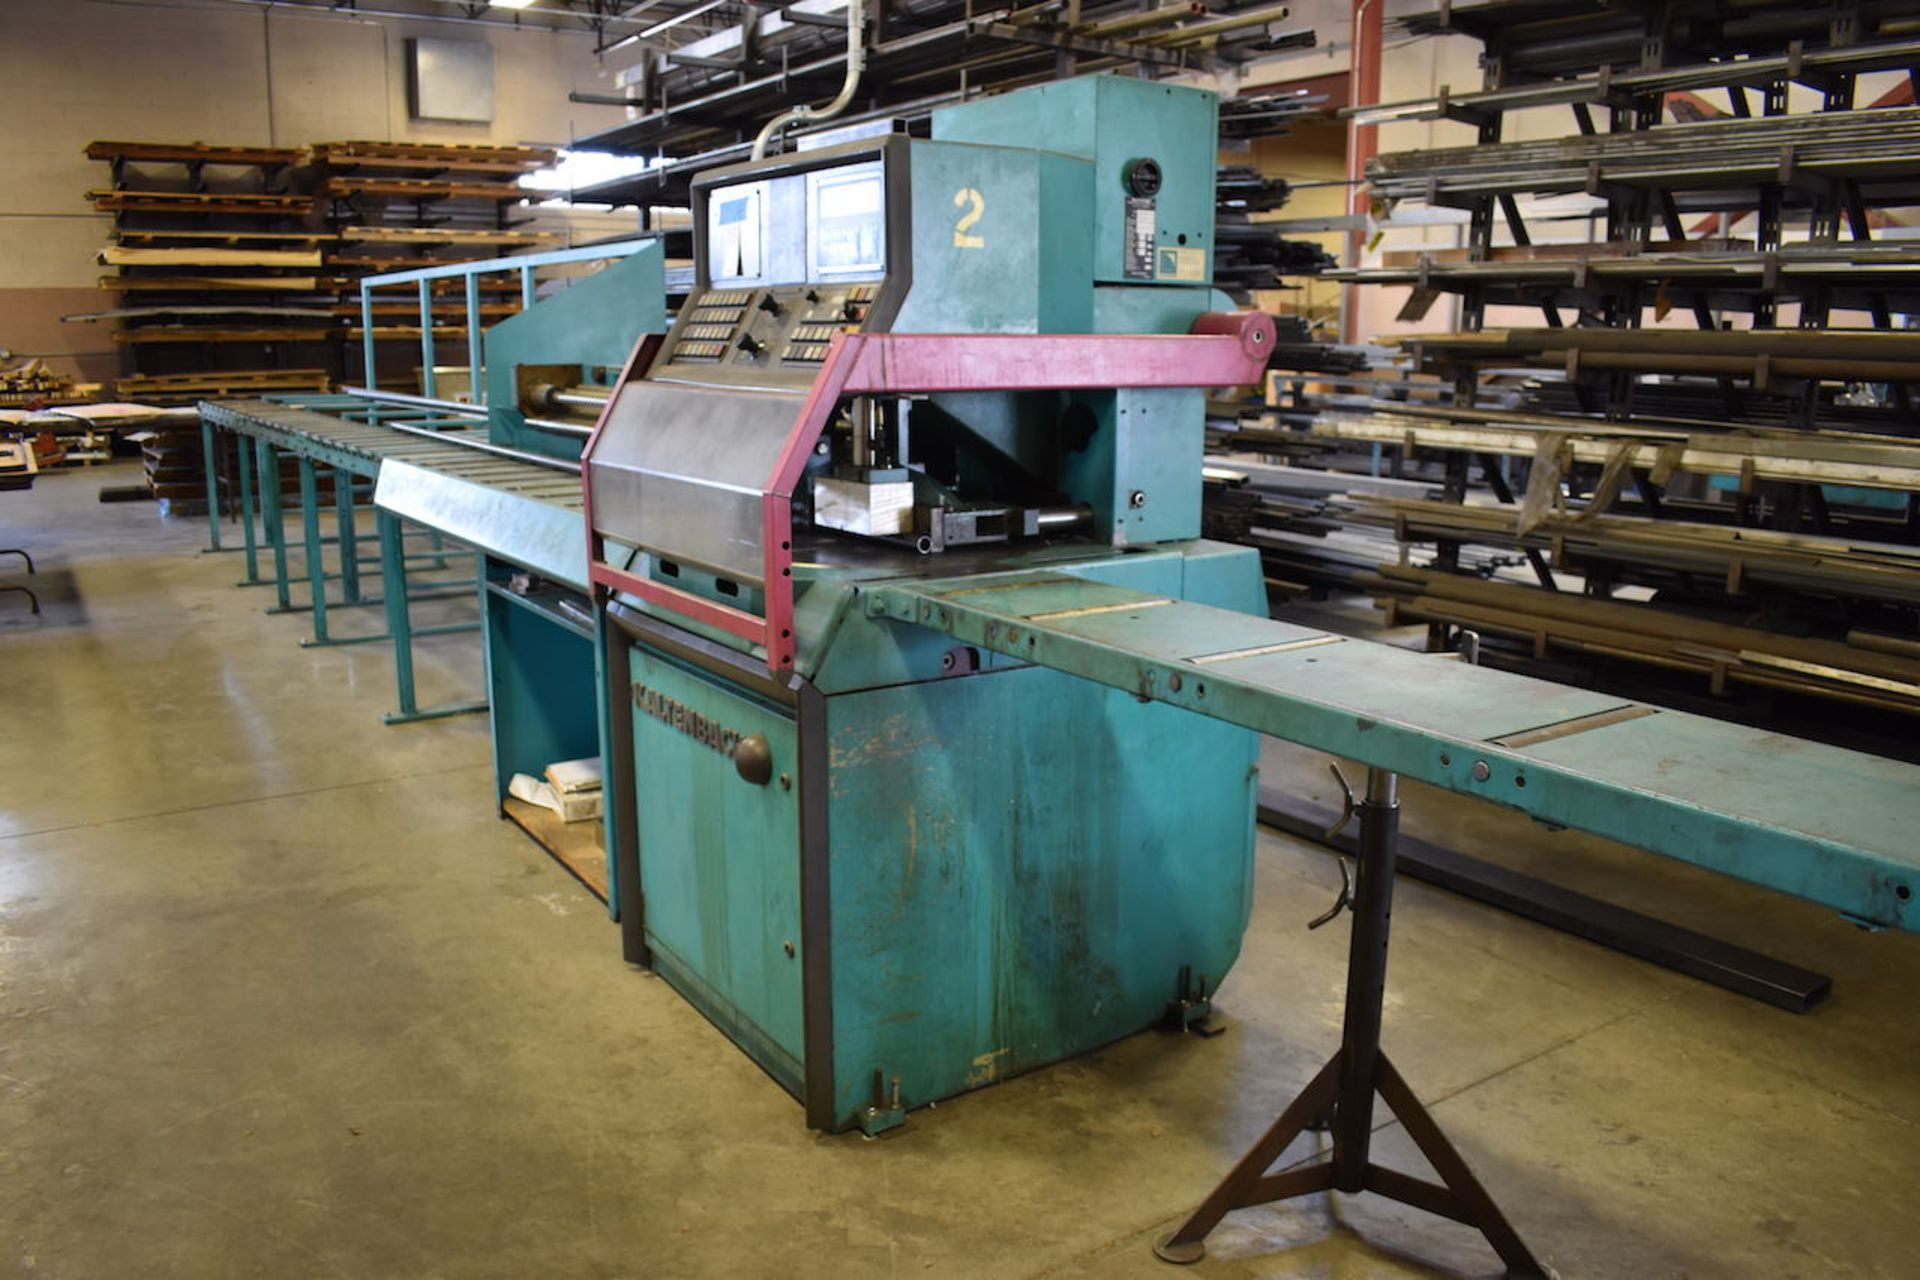 Kaltenbach Model KKS 401 Programmable Cold Saw, S/N 117245 (1994), 12 in. Wide x 26 ft. Long - Image 4 of 7